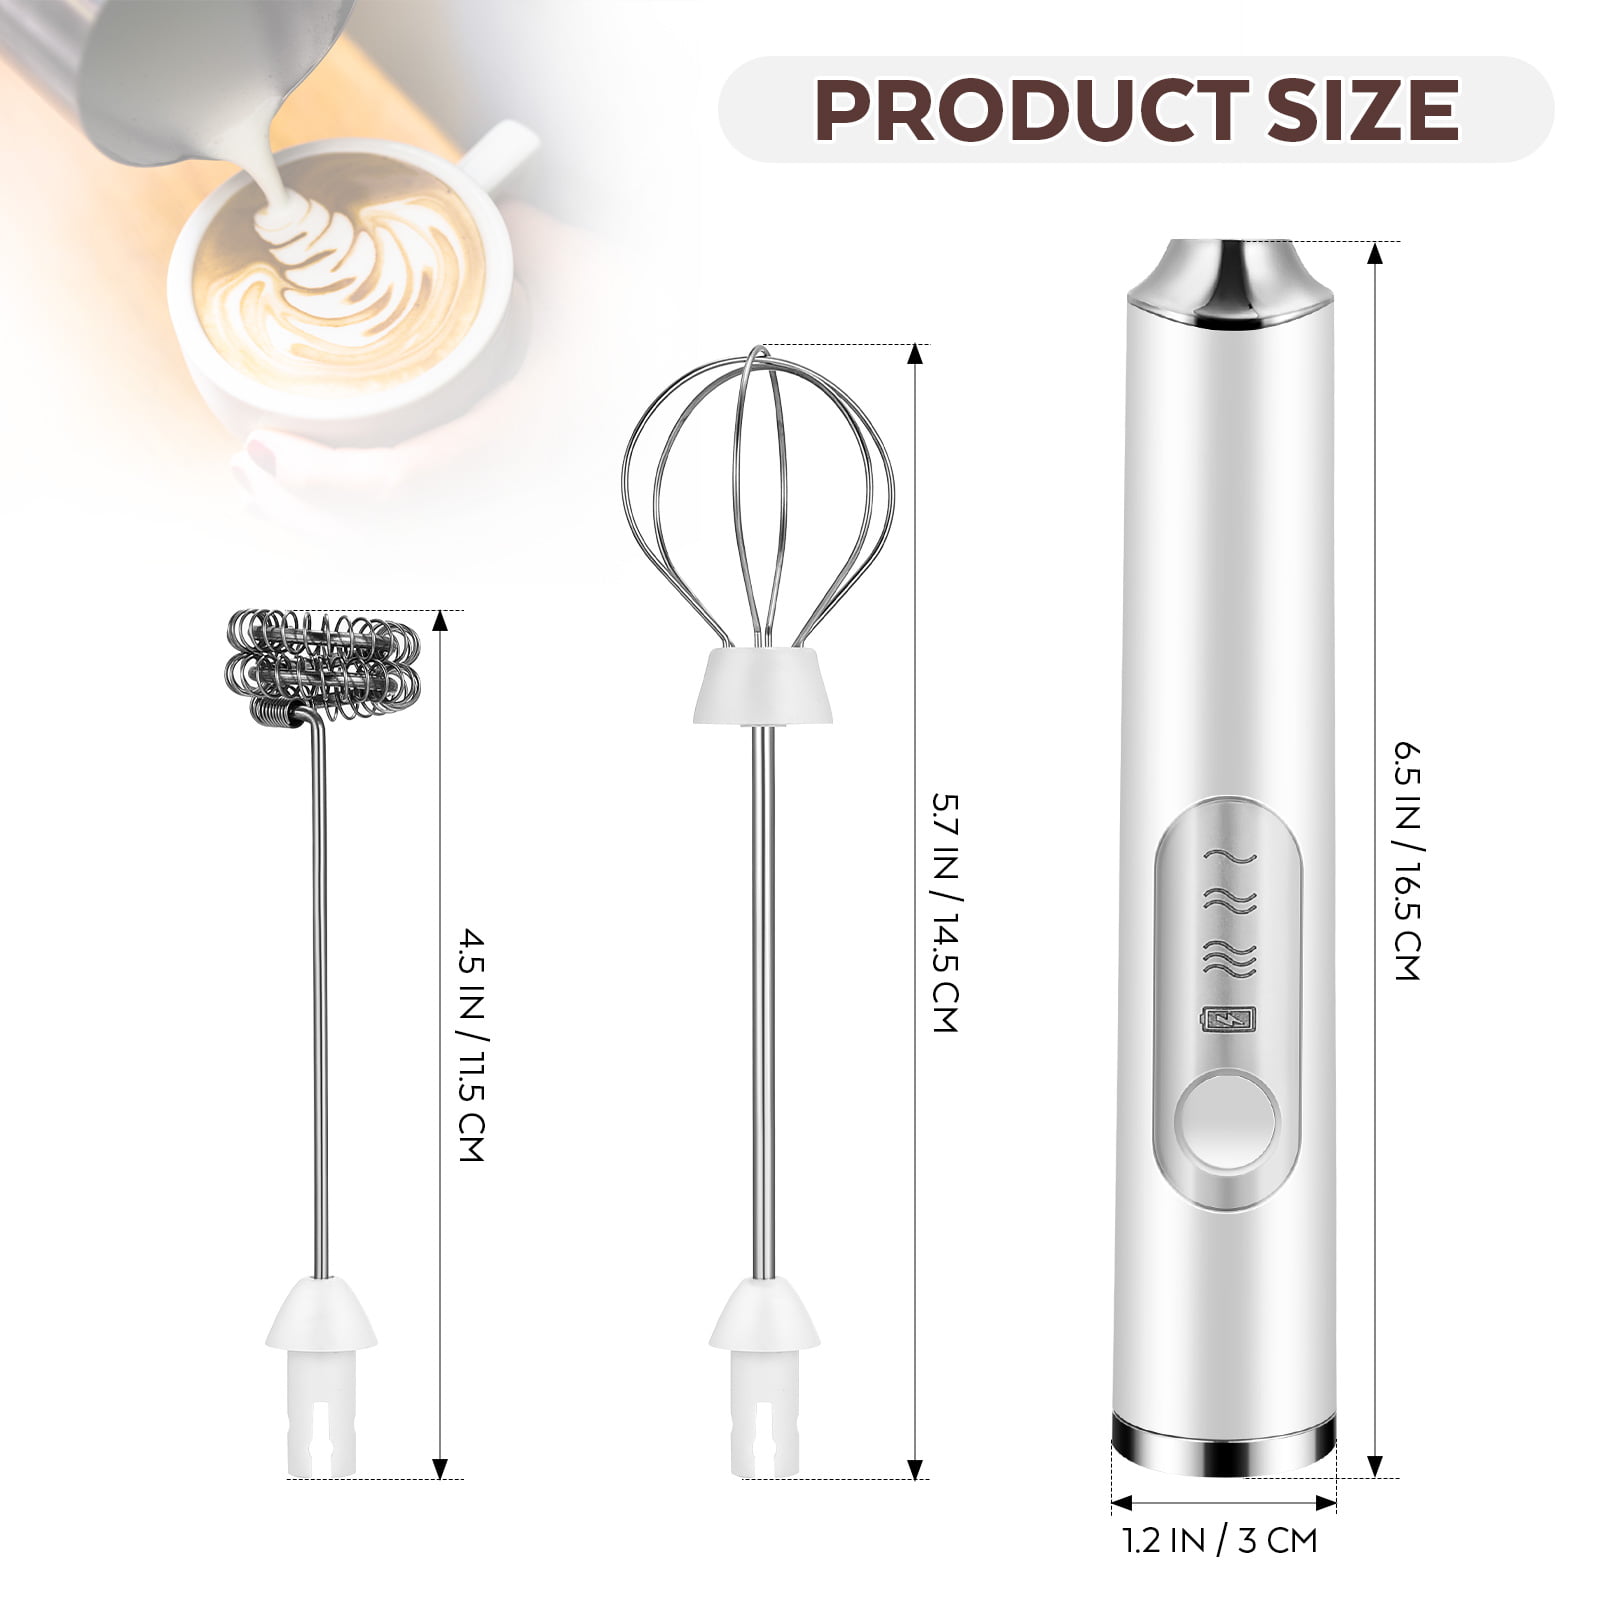 Oaktree Coffee Milk Frother Whisk Electric Mini Household Kitchen Egg White Foaming Stirrer Baking Cream Whisk-Without Battery